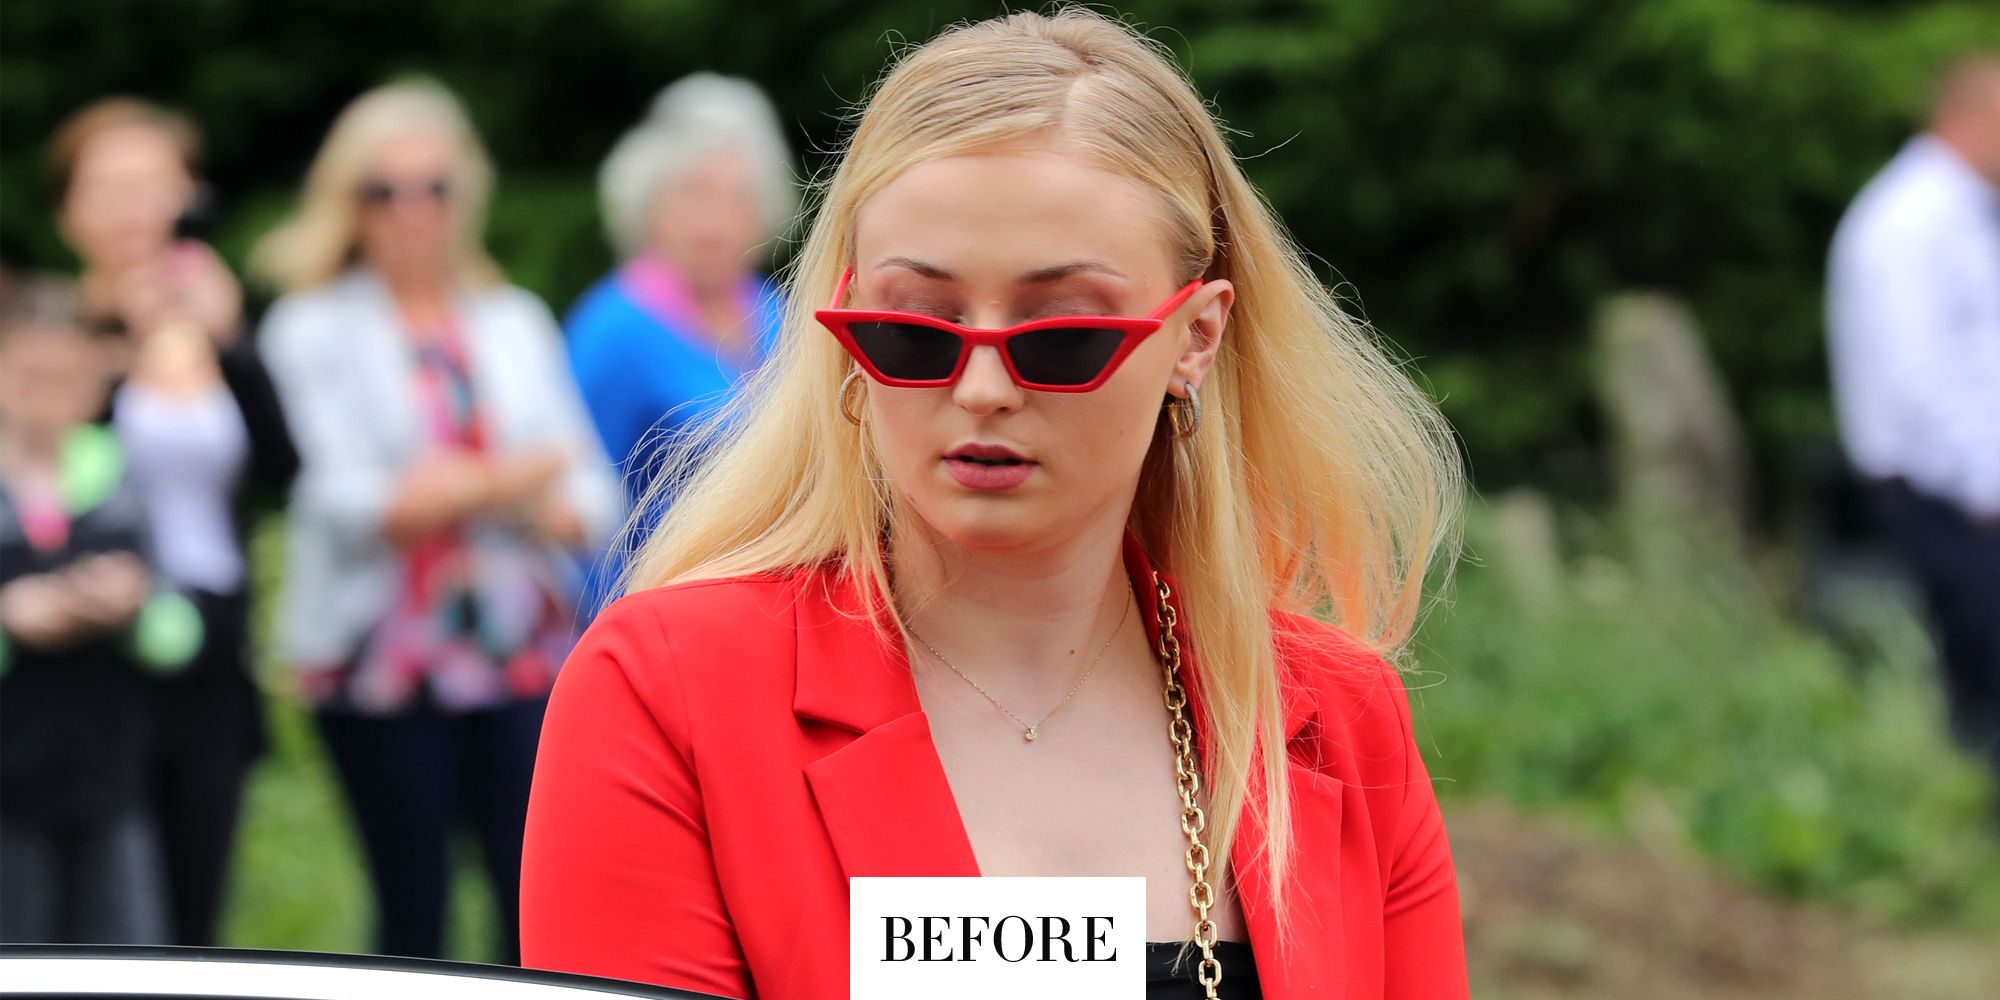 Game of Thrones': Why Sophie Turner's New Hair Cut Is Not a Spoiler